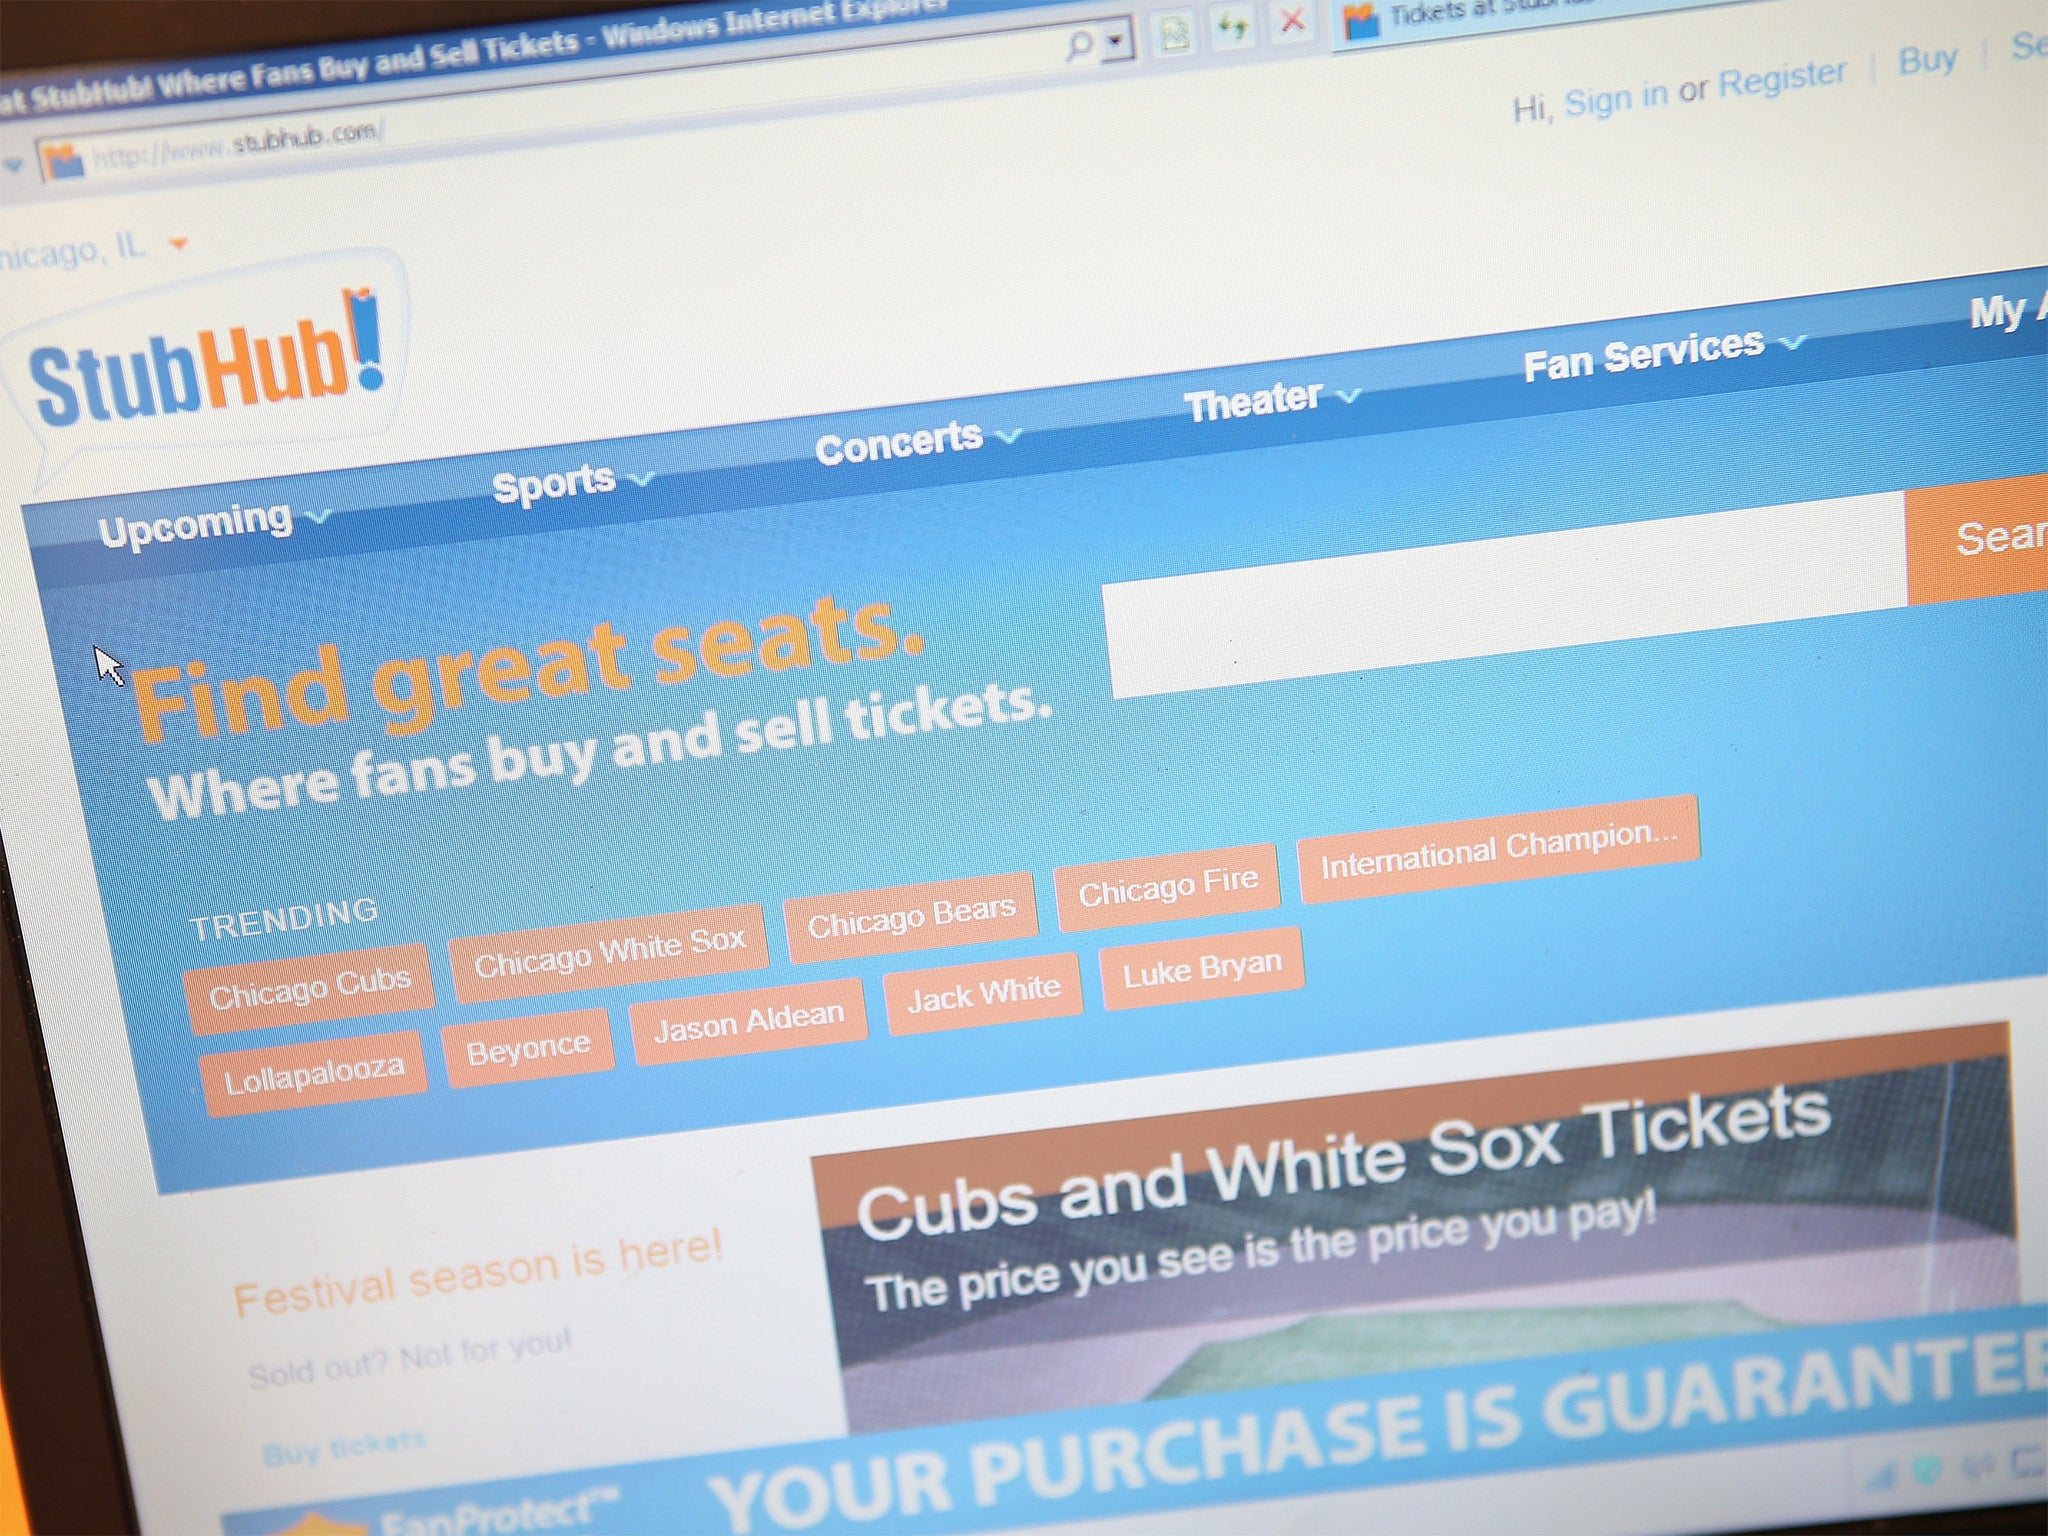 Thieves hacked into about 1,000 StubHub customers' accounts and fraudulently bought tickets for events